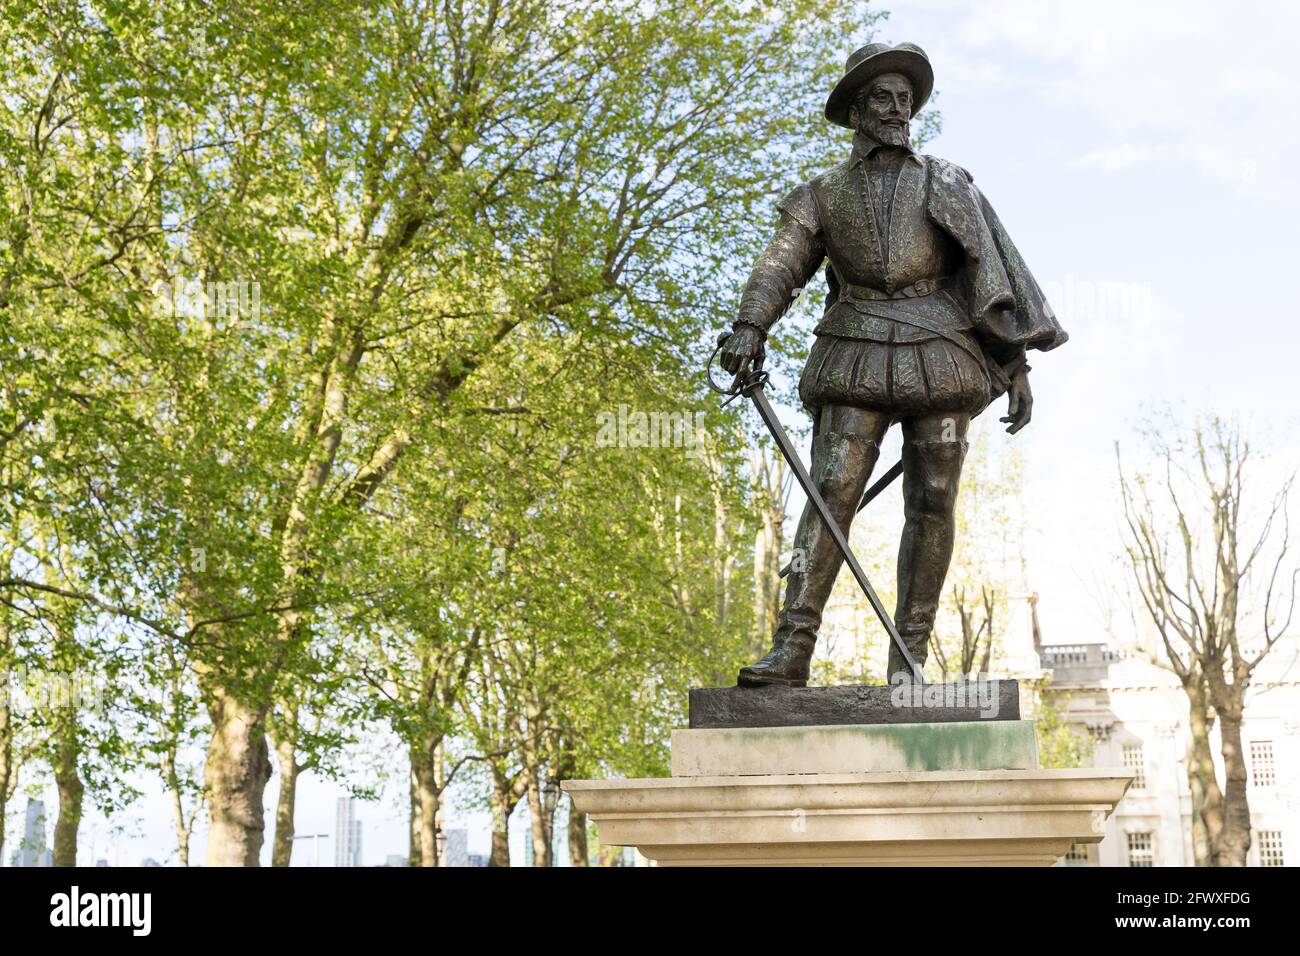 Statue de sir Walter Raleigh, ANCIEN ROYAL NAVAL COLLEGE, Greenwich, Londres, Angleterre, Royaume-Uni, ROYAUME-UNI Banque D'Images